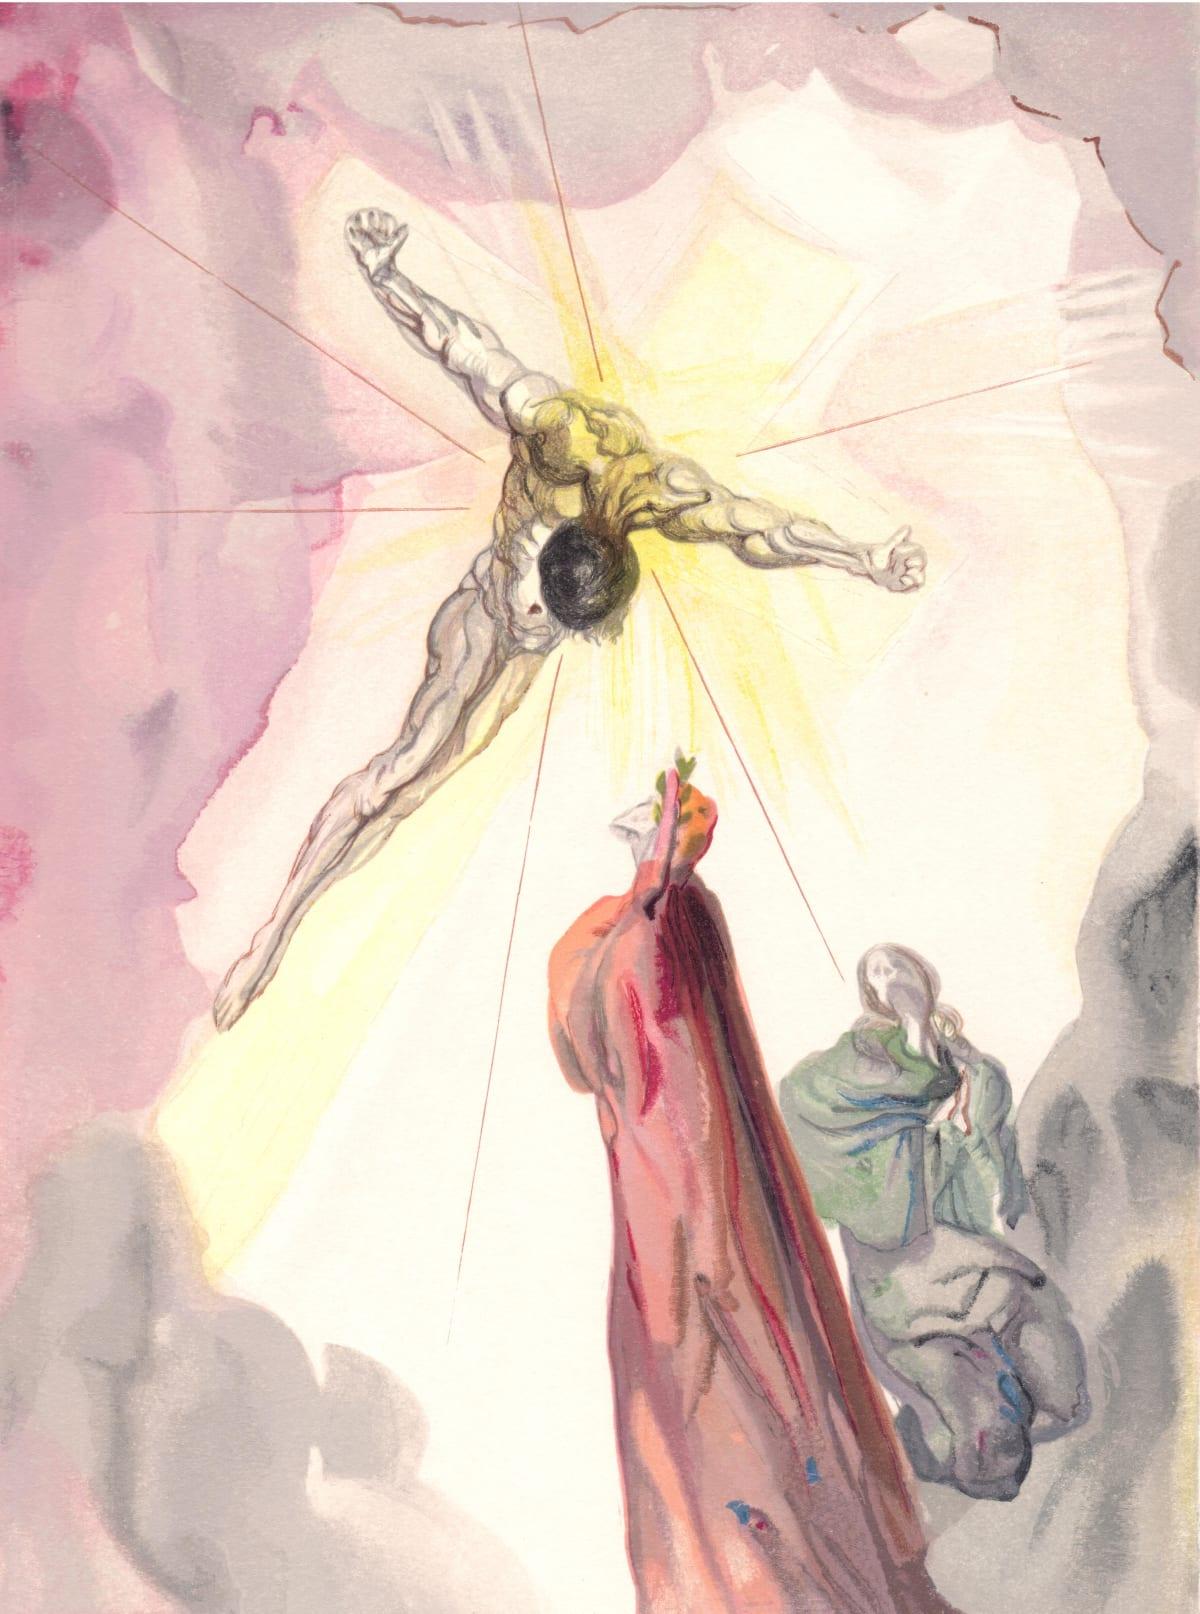 Artist: Salvador Dali (1904-1989)
Year: 1963
Medium: Wood engraving in colors on Rives BFK paper
Inscription: Unsigned and unnumbered, as issued
Edition: 4765 in French; 3188 in Italian, plus proofs
Catalogue Raisonne Reference: Michler & Löpsinger